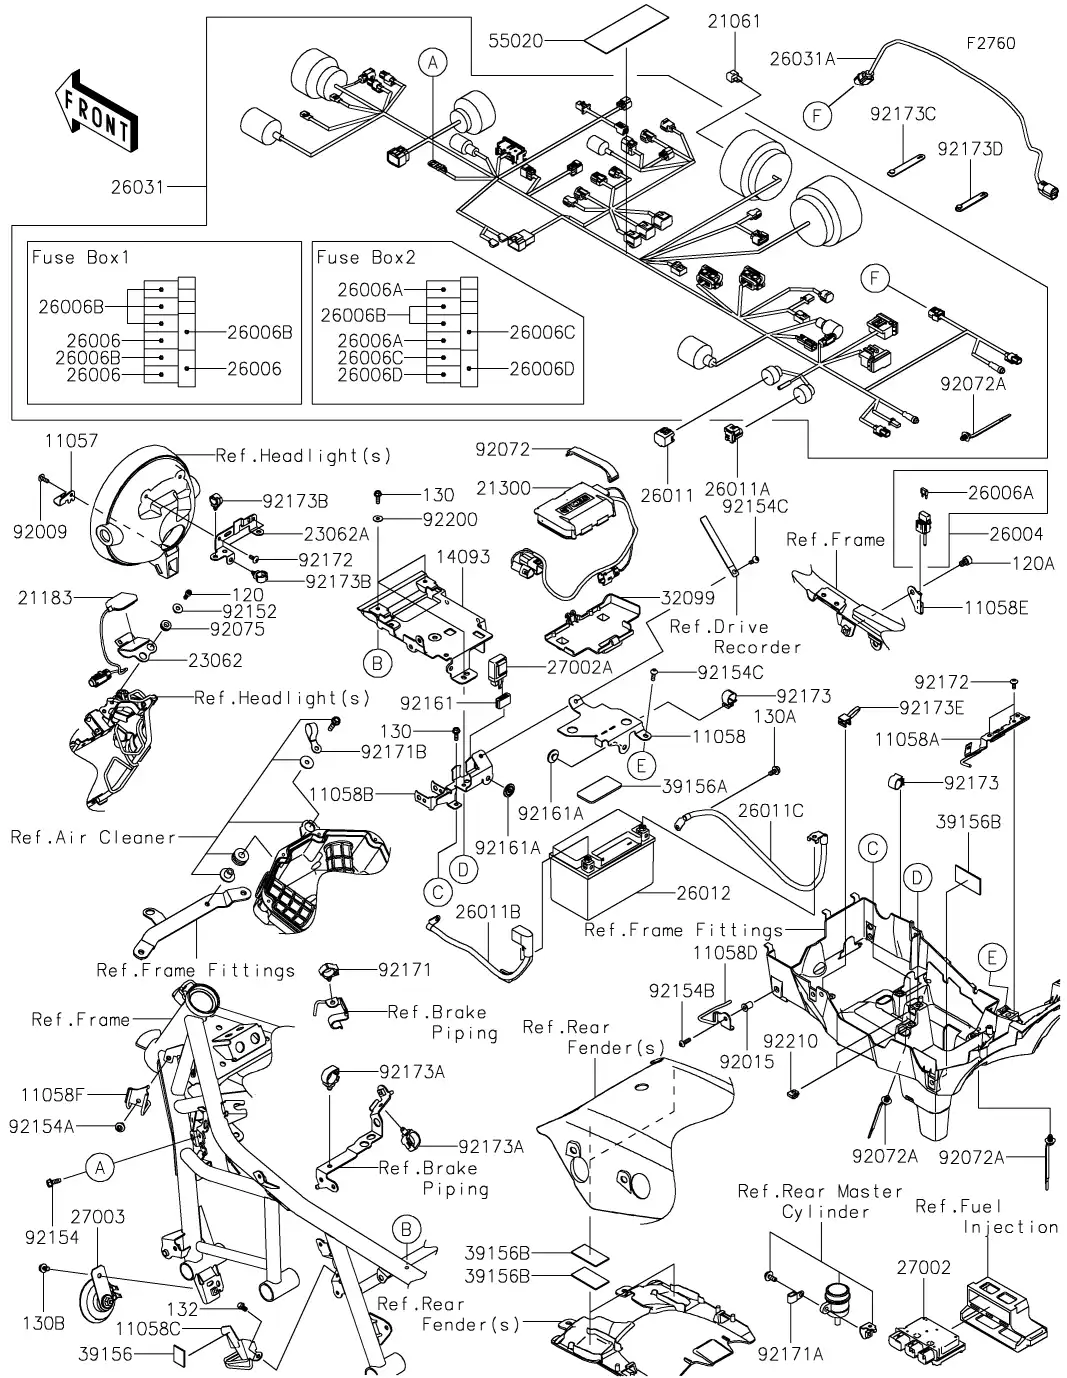 Vehicle Body Electrical Equipment